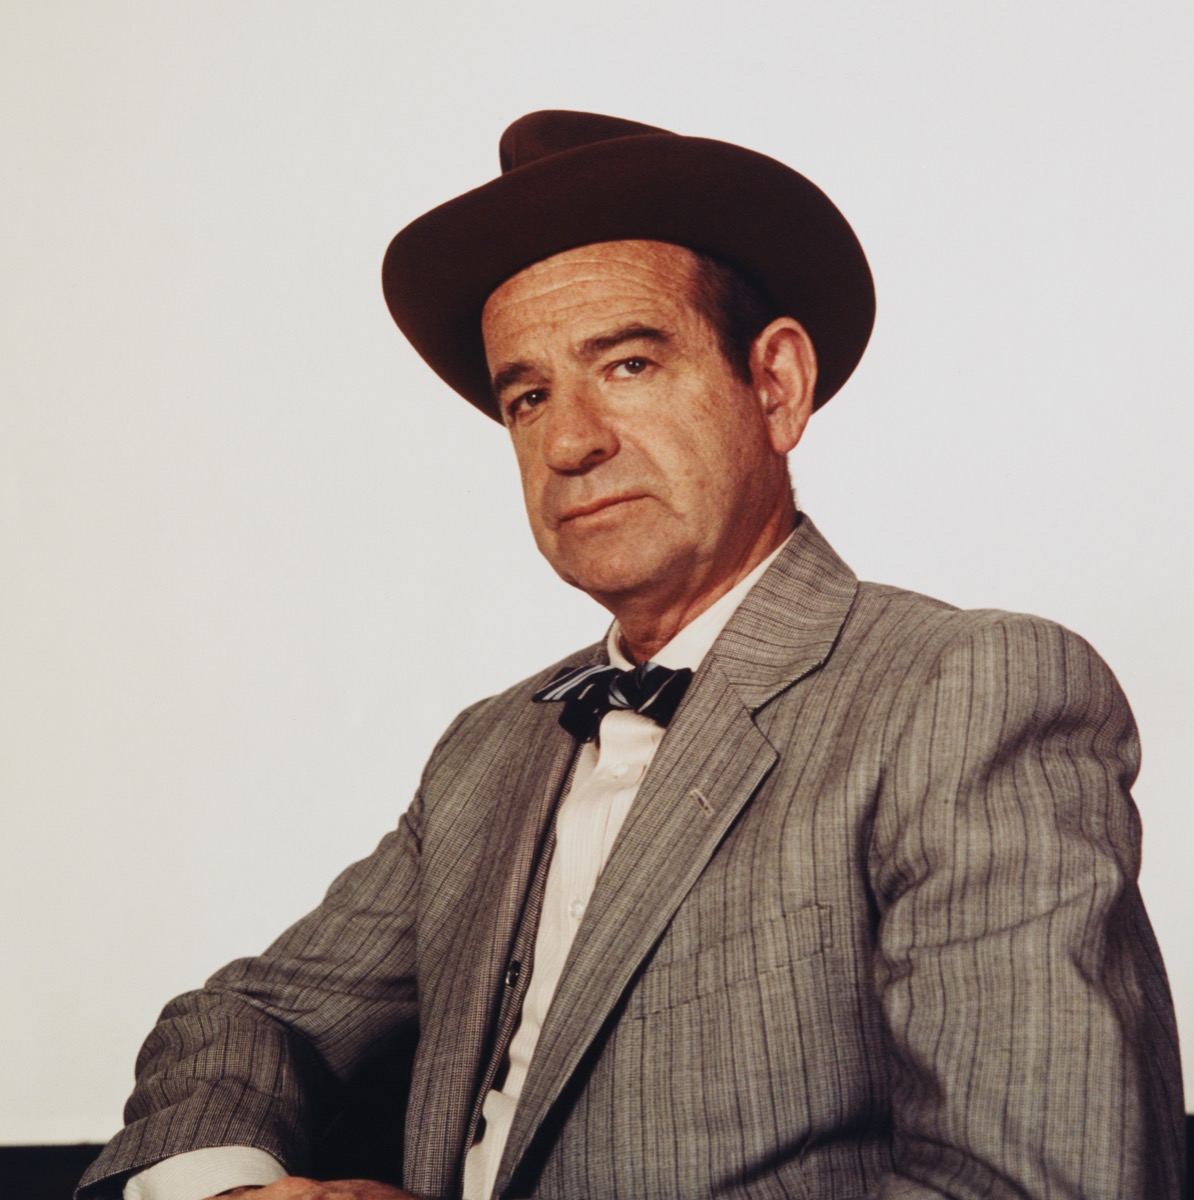 Walter Matthau in The Front Page